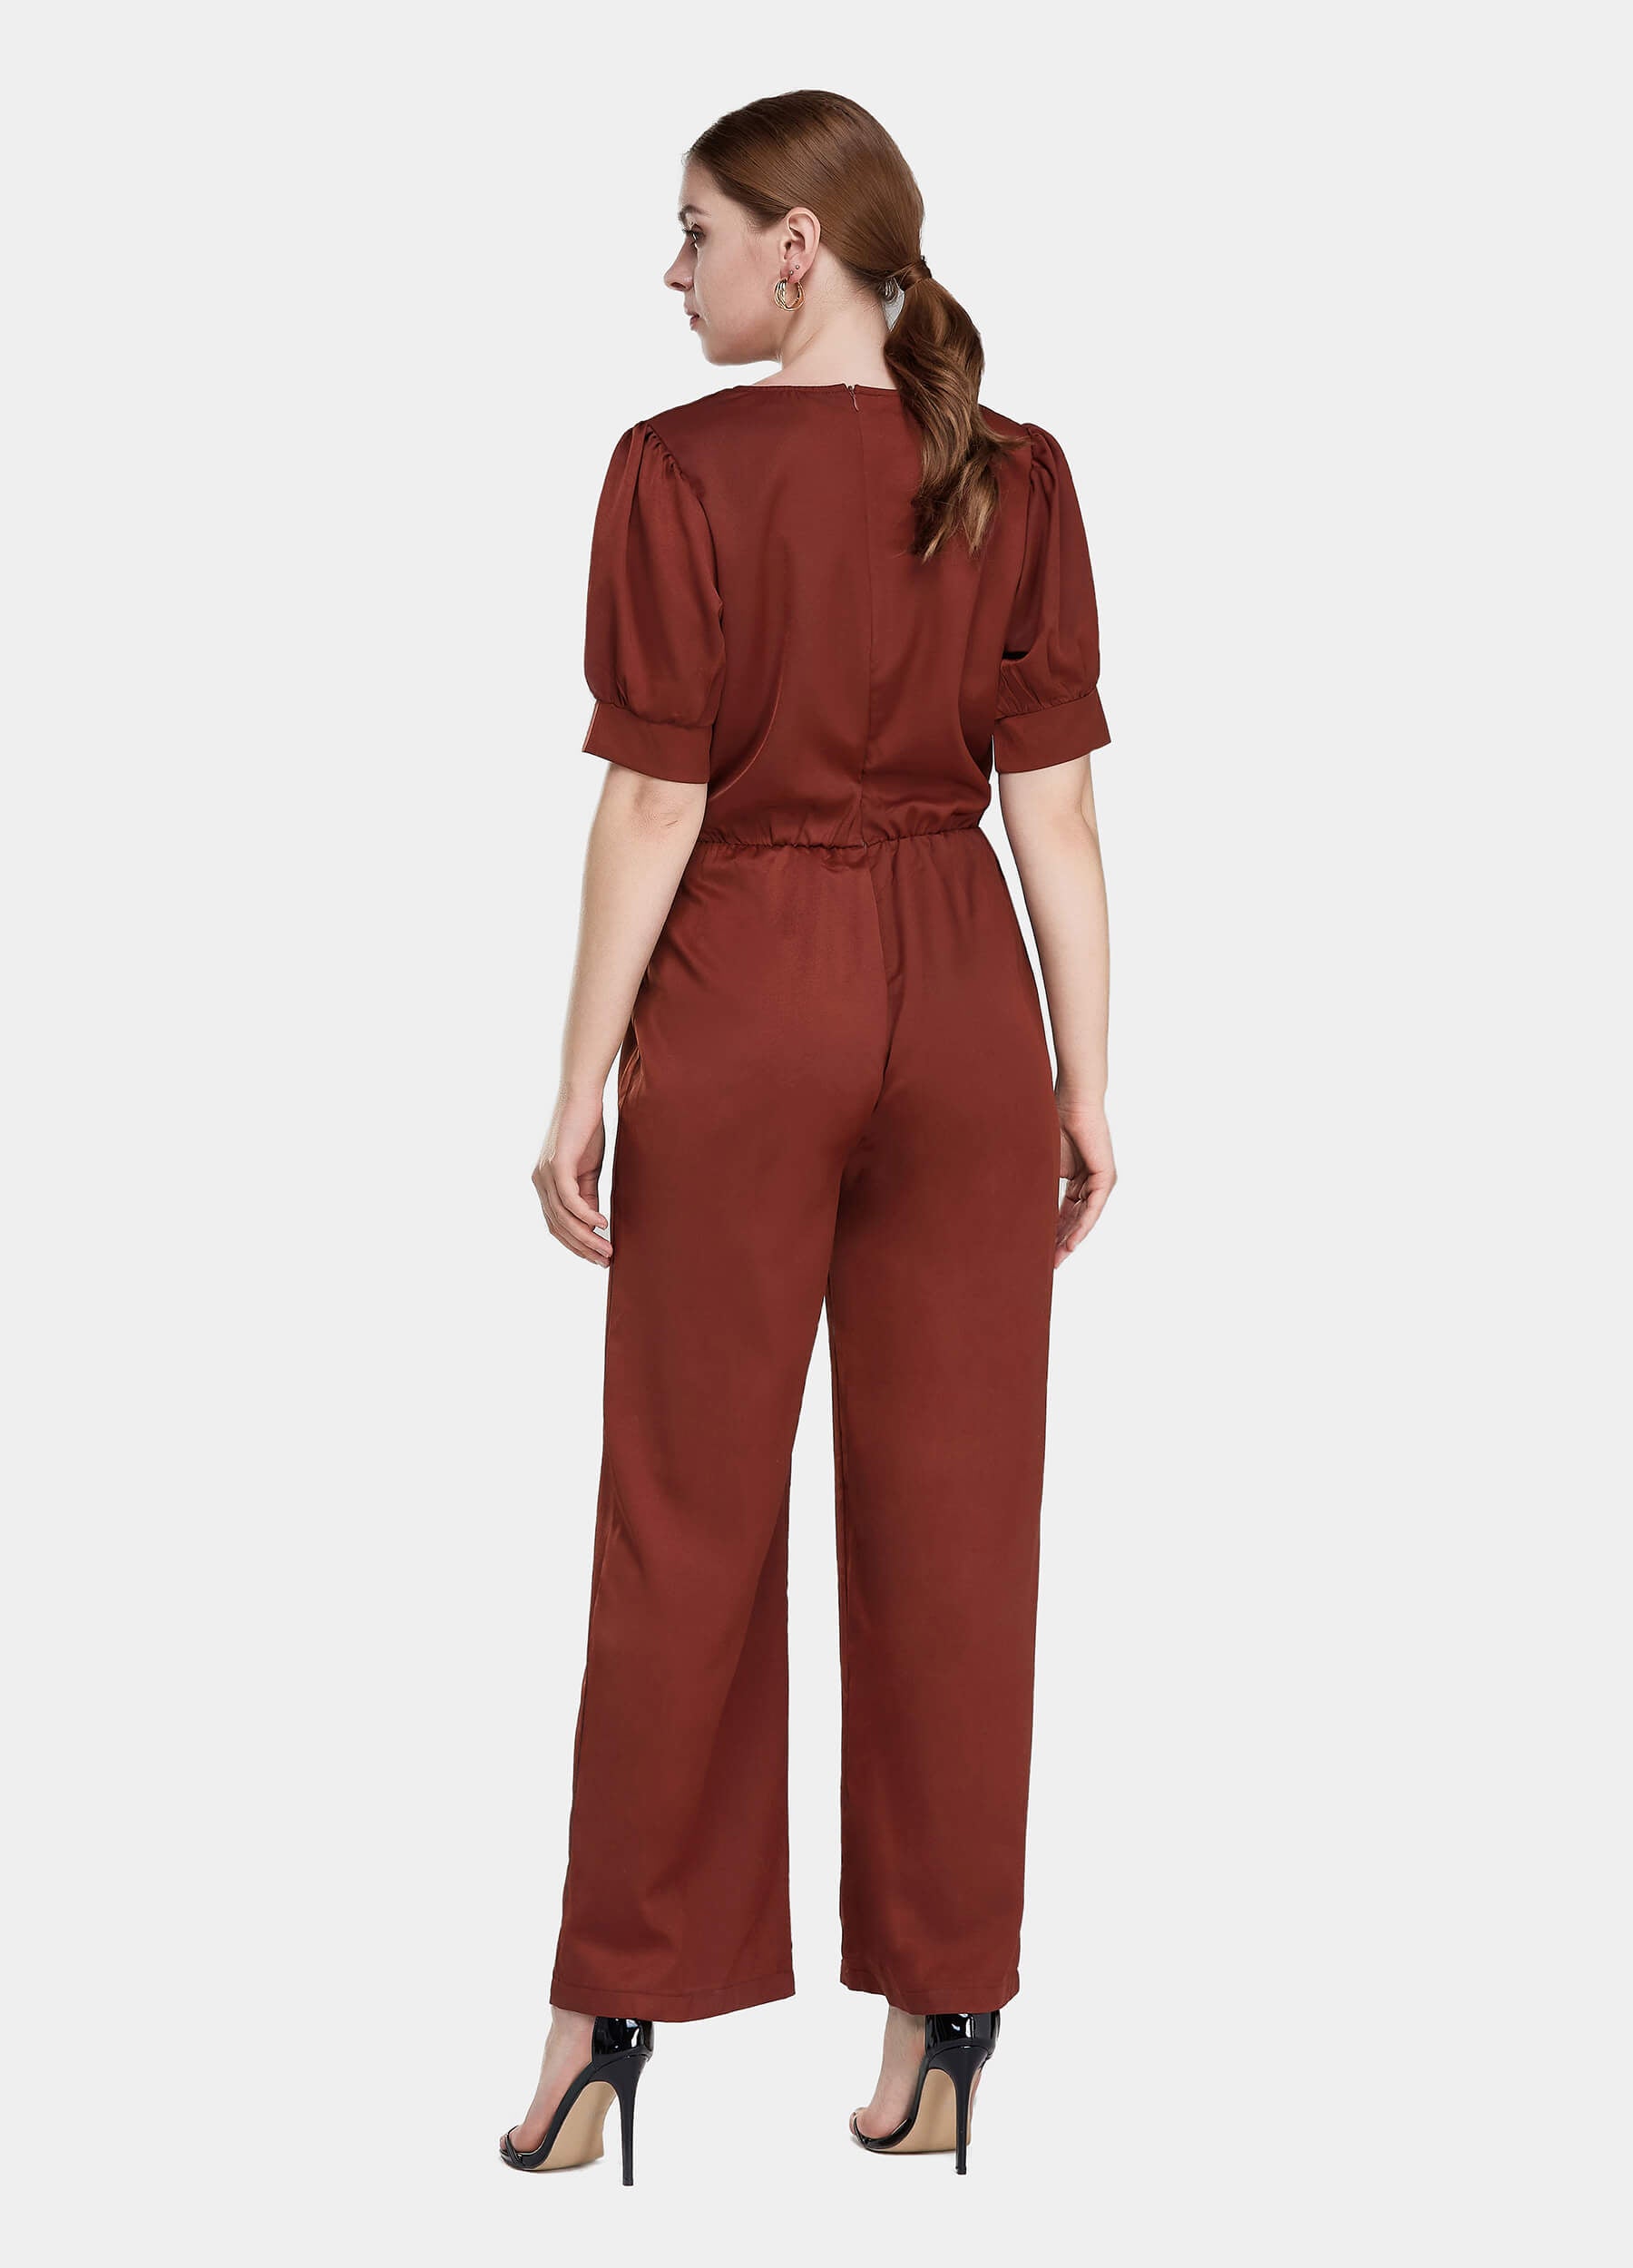 Women's Solid Shirred Waist Wide Leg Deep V-Neck Jumpsuit-Wine Red back view